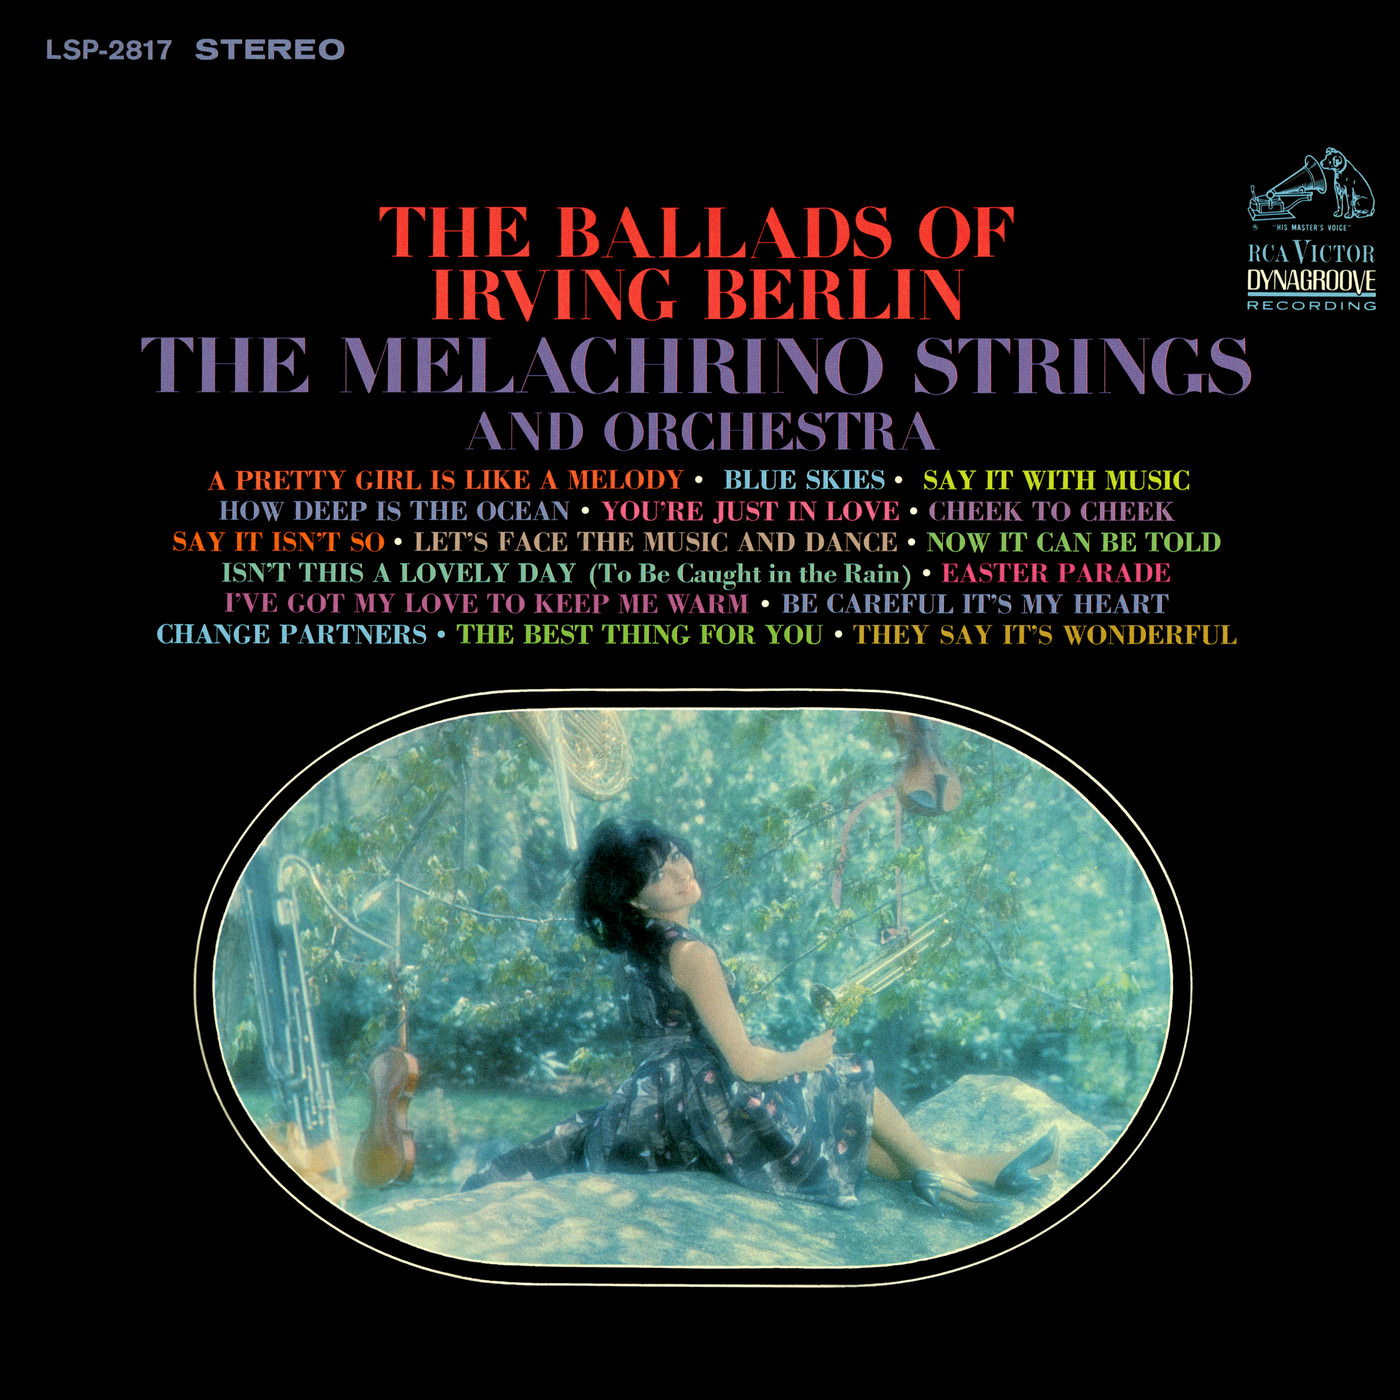 The Melachrino Strings and Orchestra - The Ballads Of Irving Berlin (1968/2018) [AcousticSounds FLAC 24bit/192kHz]